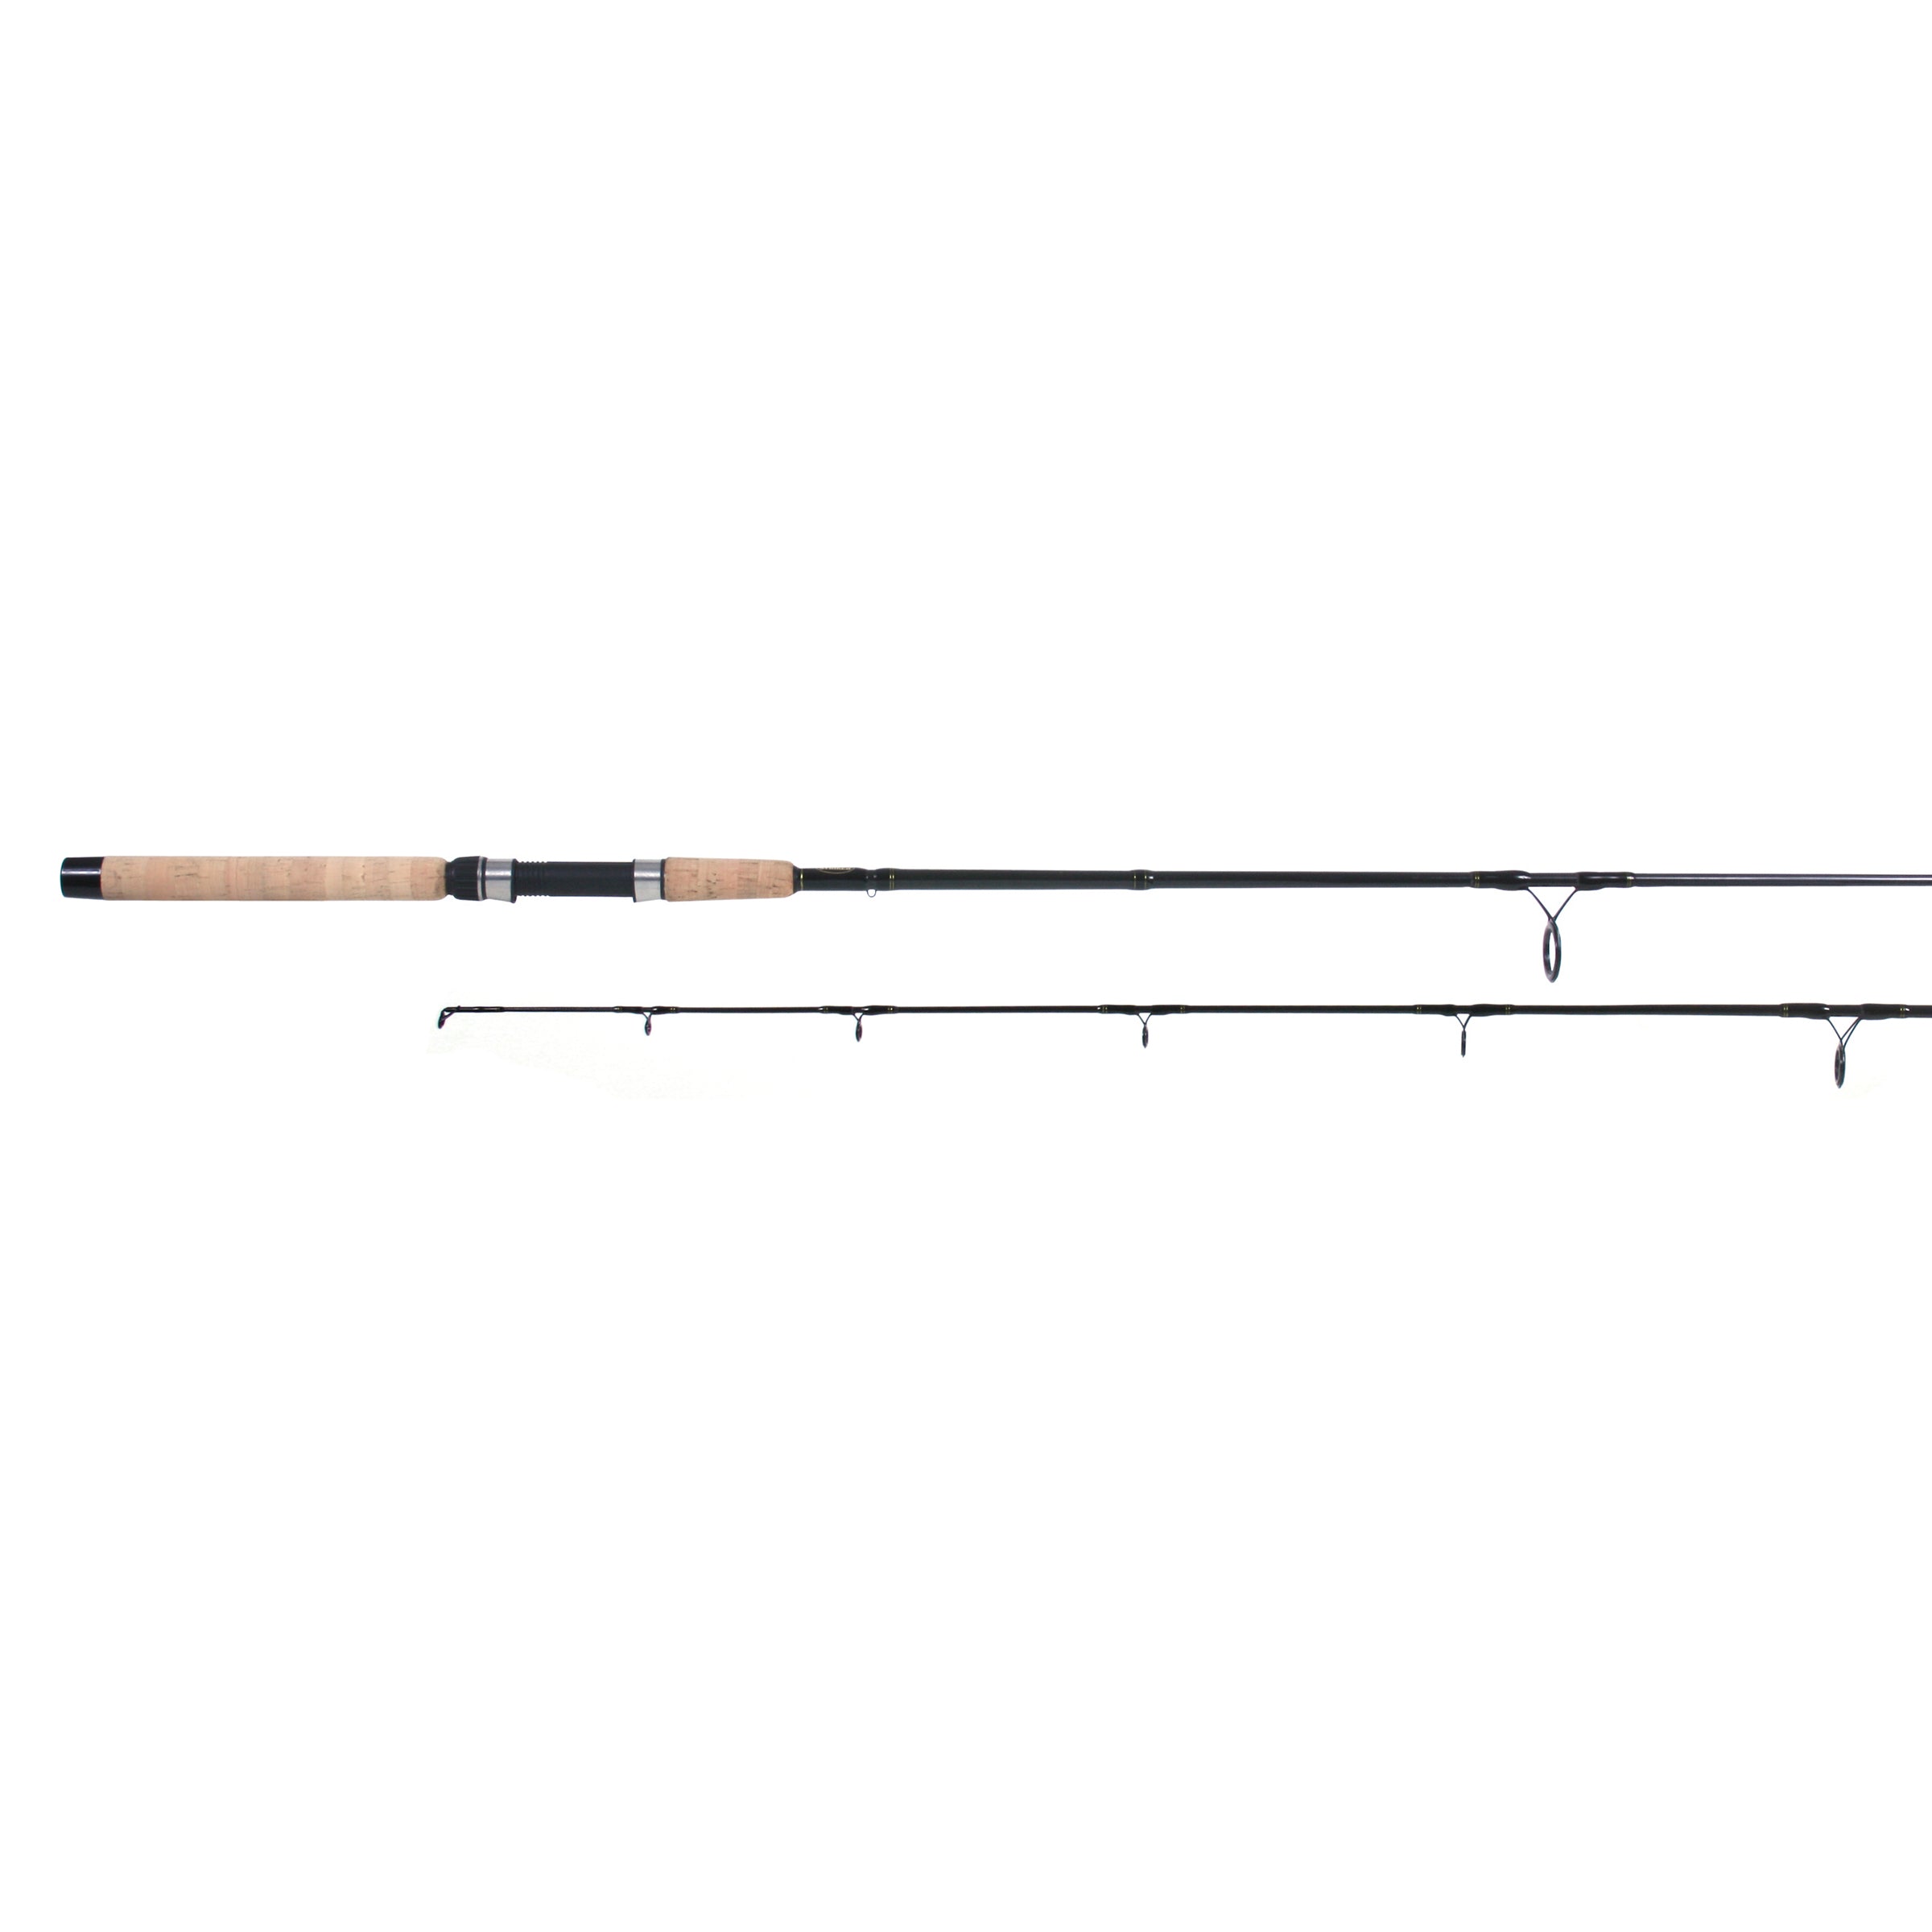 Contour Inshore Spinning Rod